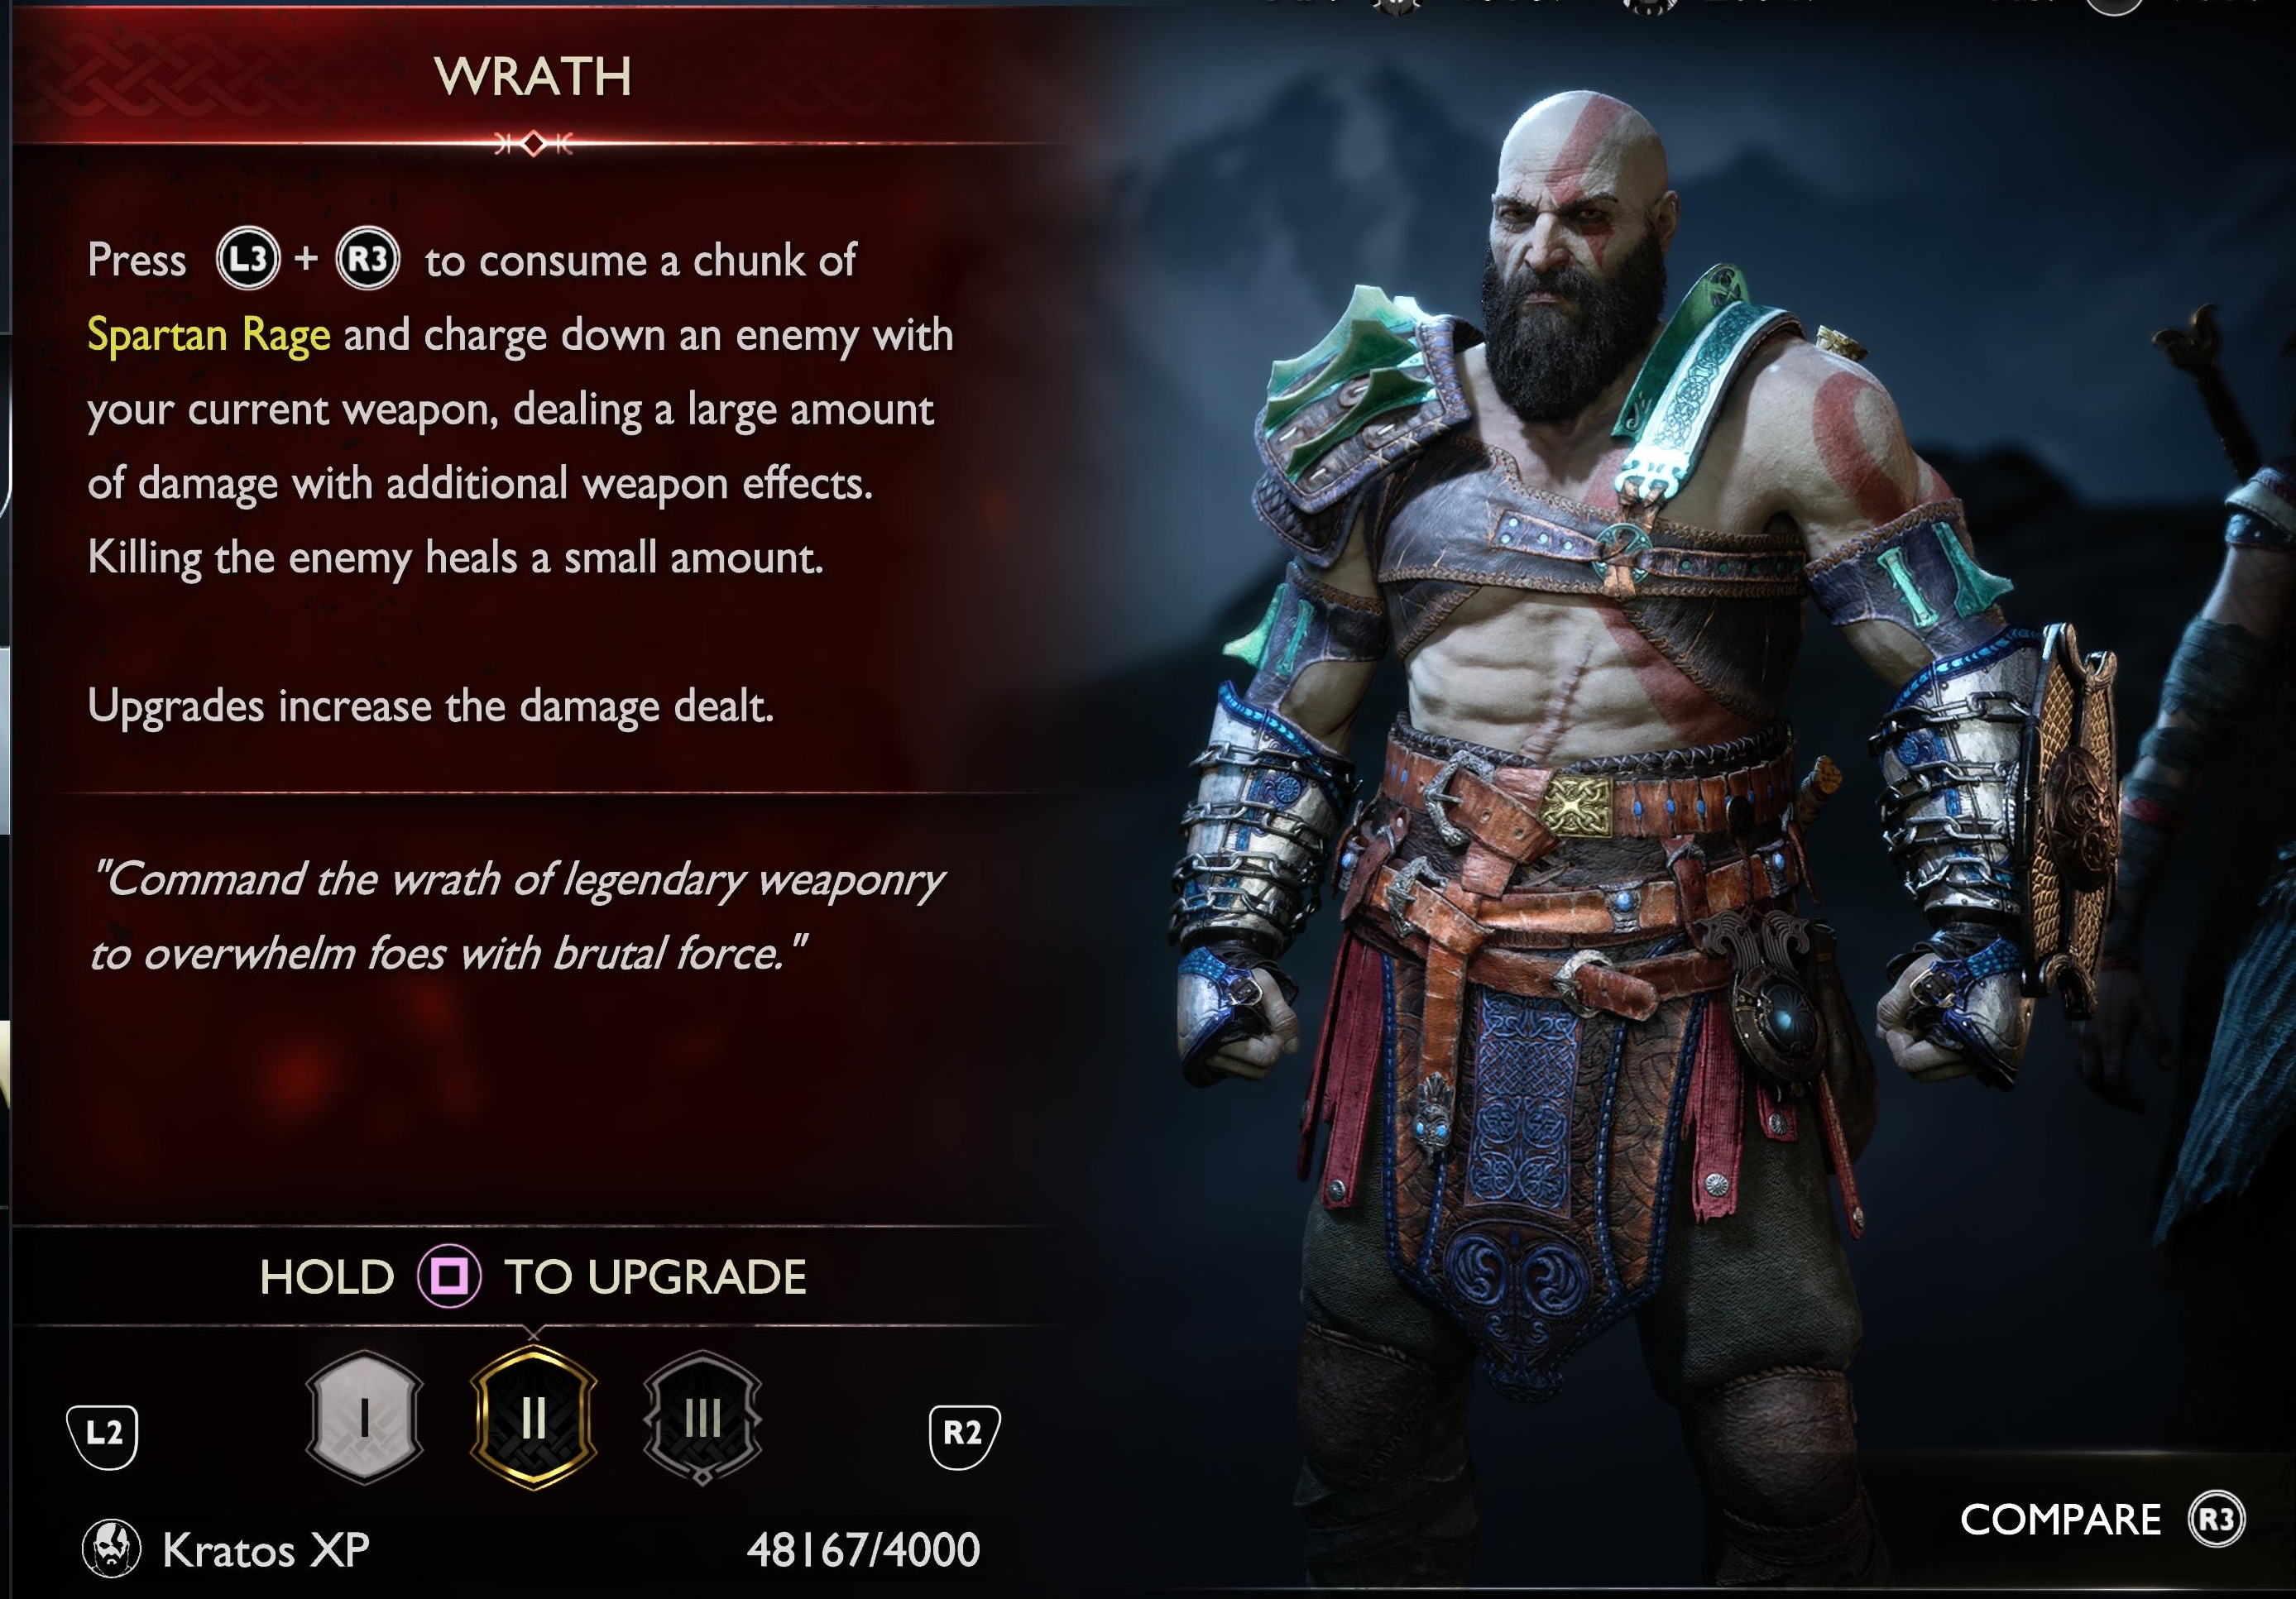 How To Increase Your Spartan Rage in God of War Ragnarok